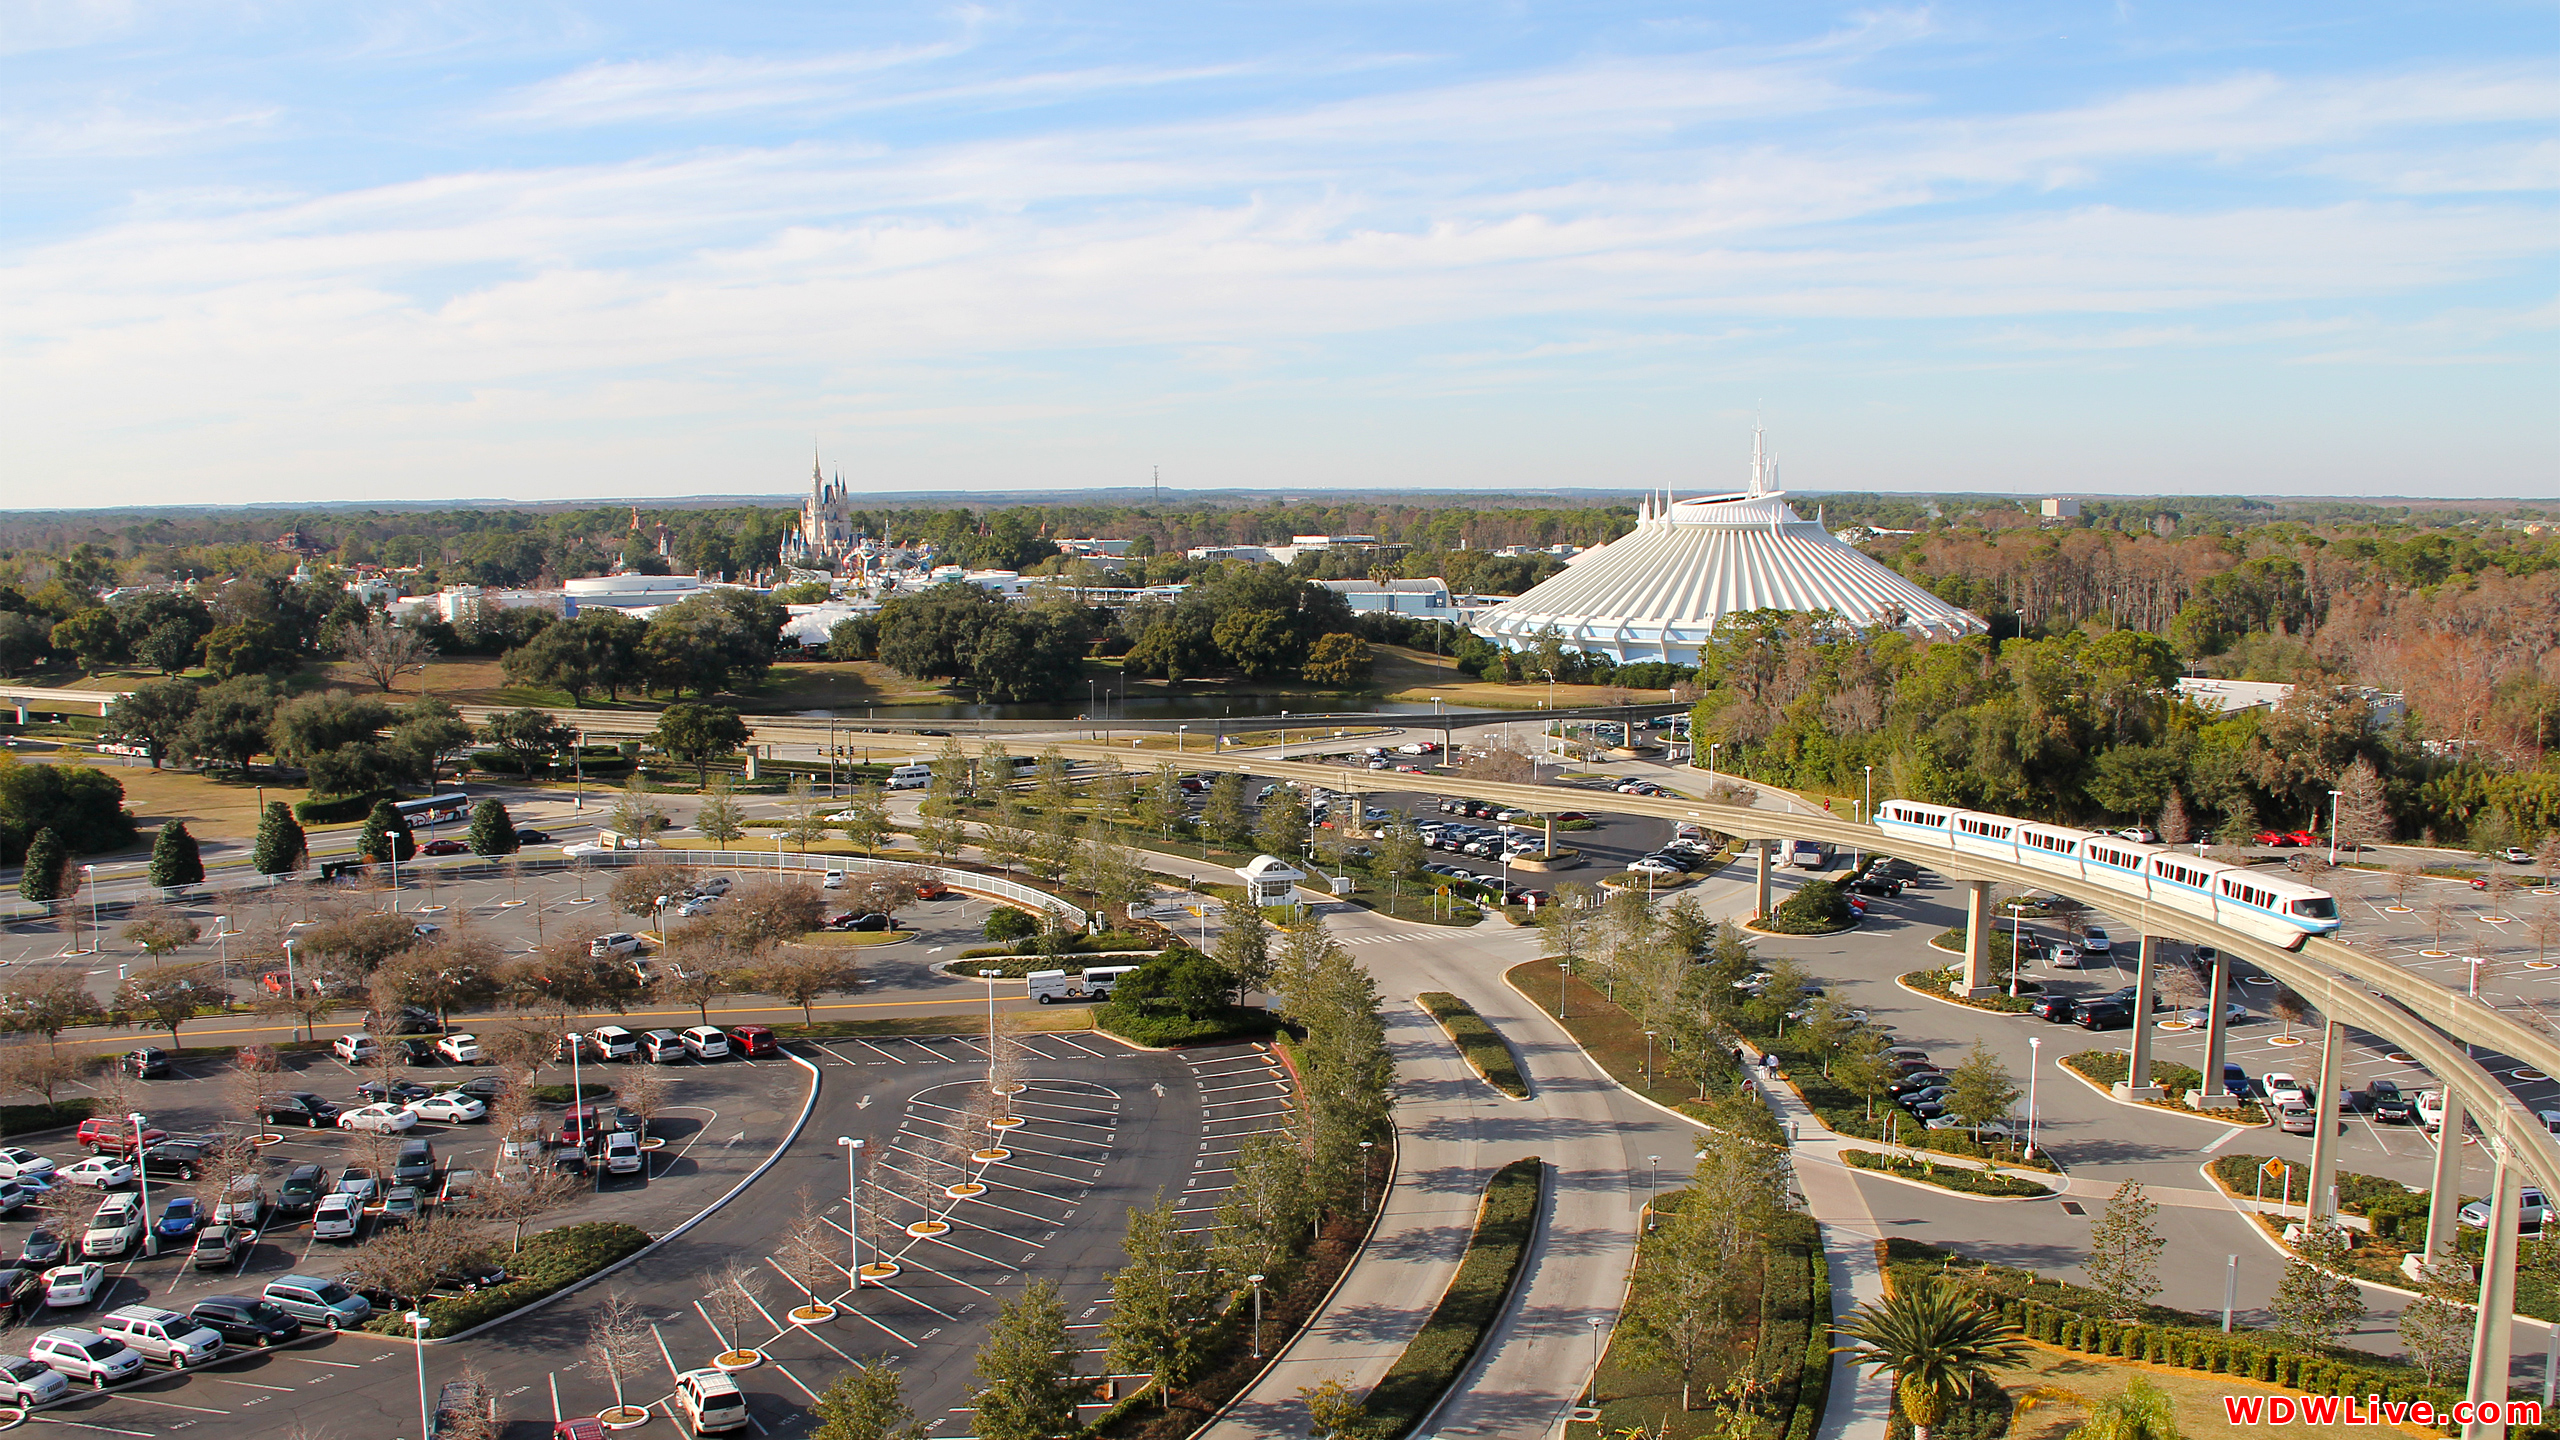 Monorail: View of the Magic Kingdom from the Contemporary Resort.